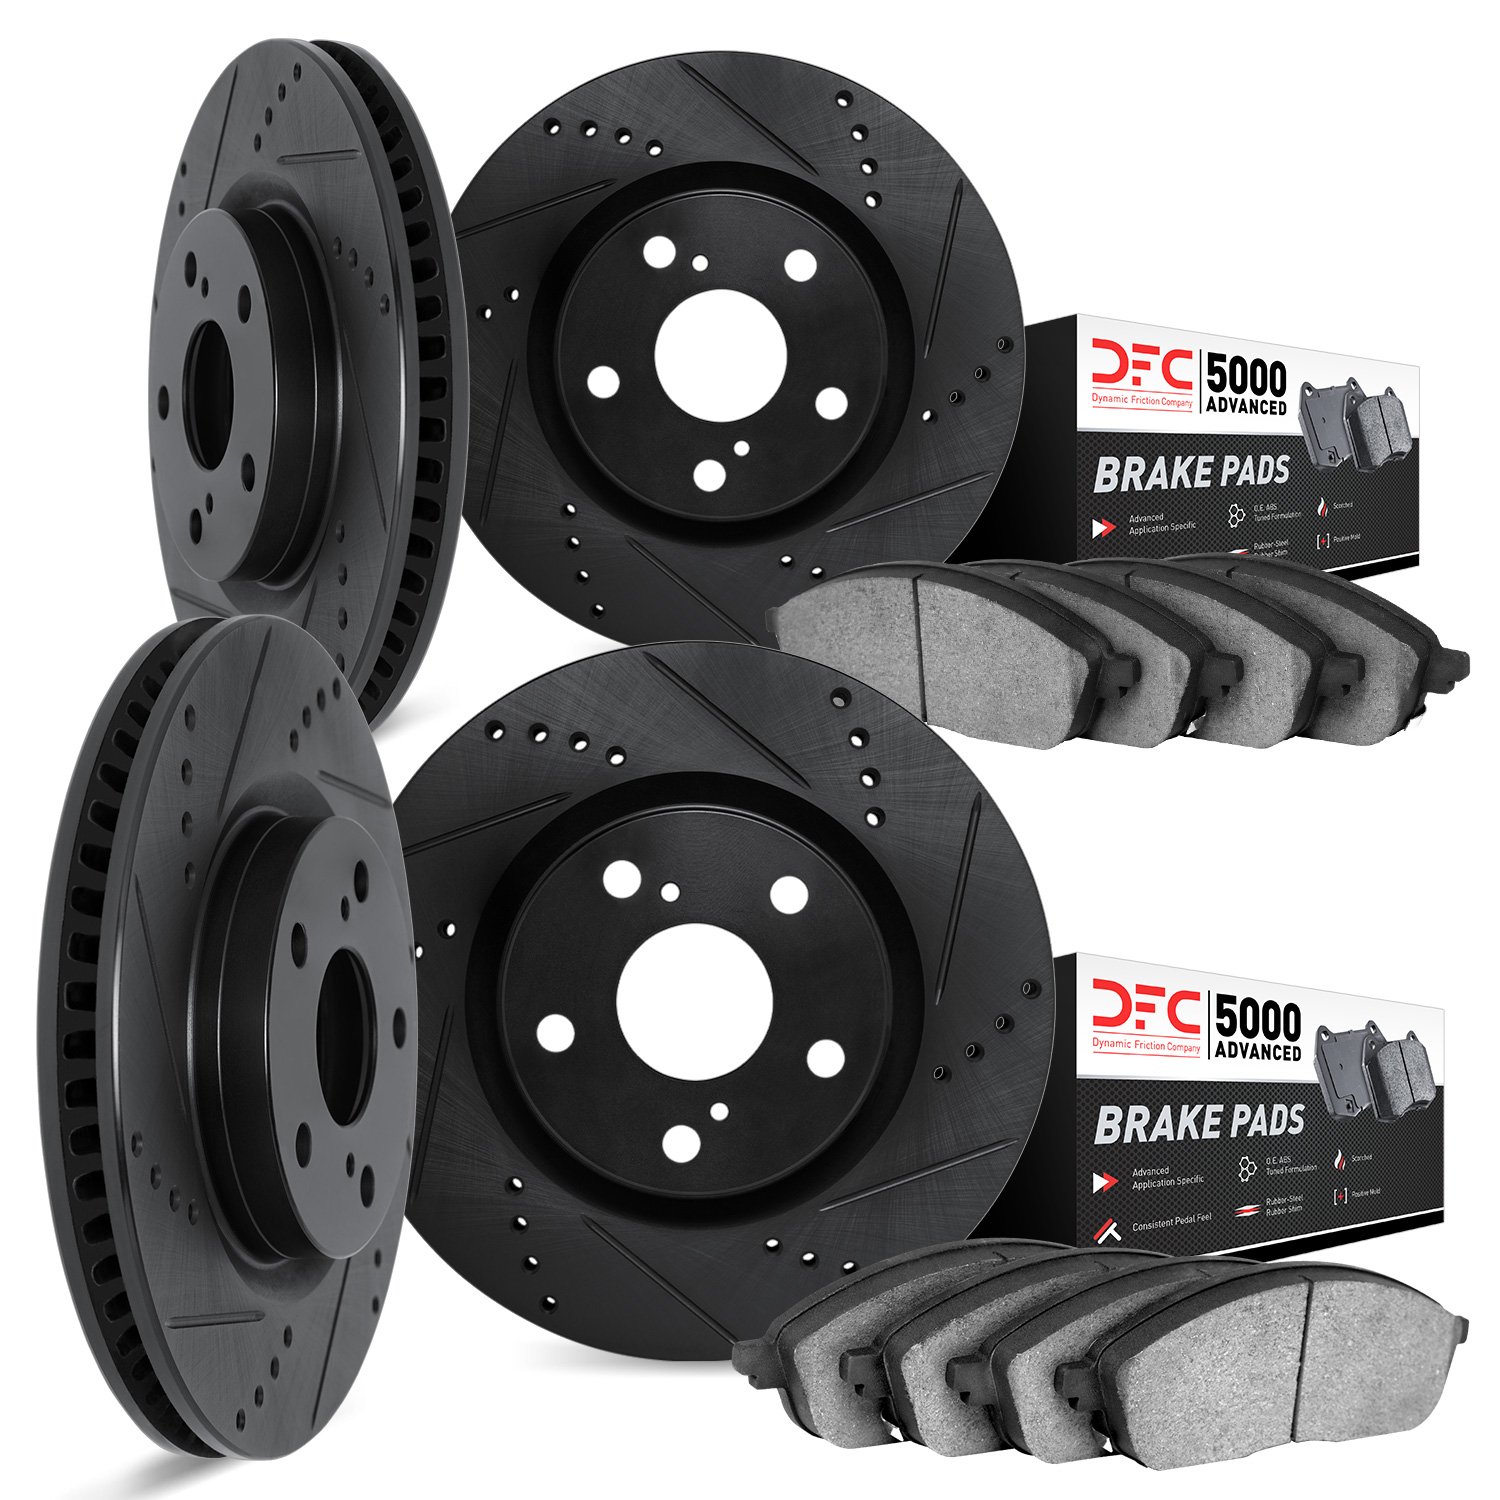 8504-31051 Drilled/Slotted Brake Rotors w/5000 Advanced Brake Pads Kit [Black], 2012-2016 BMW, Position: Front and Rear